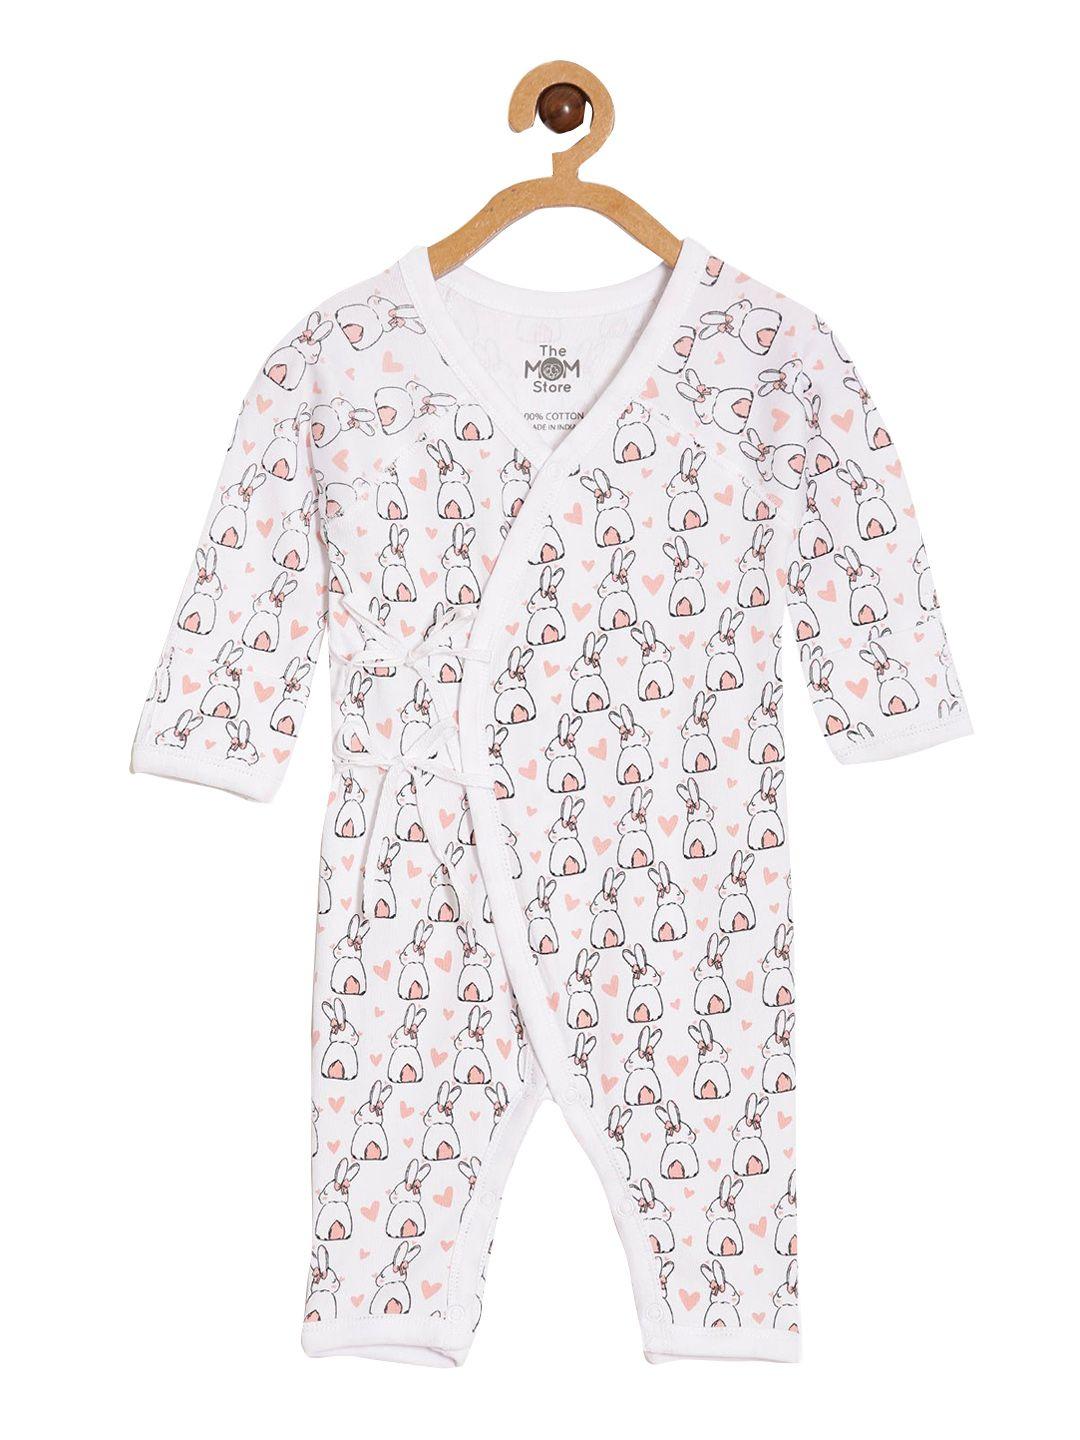 the-mom-store-infants-heart-&-fluffs-printed-cotton-romper